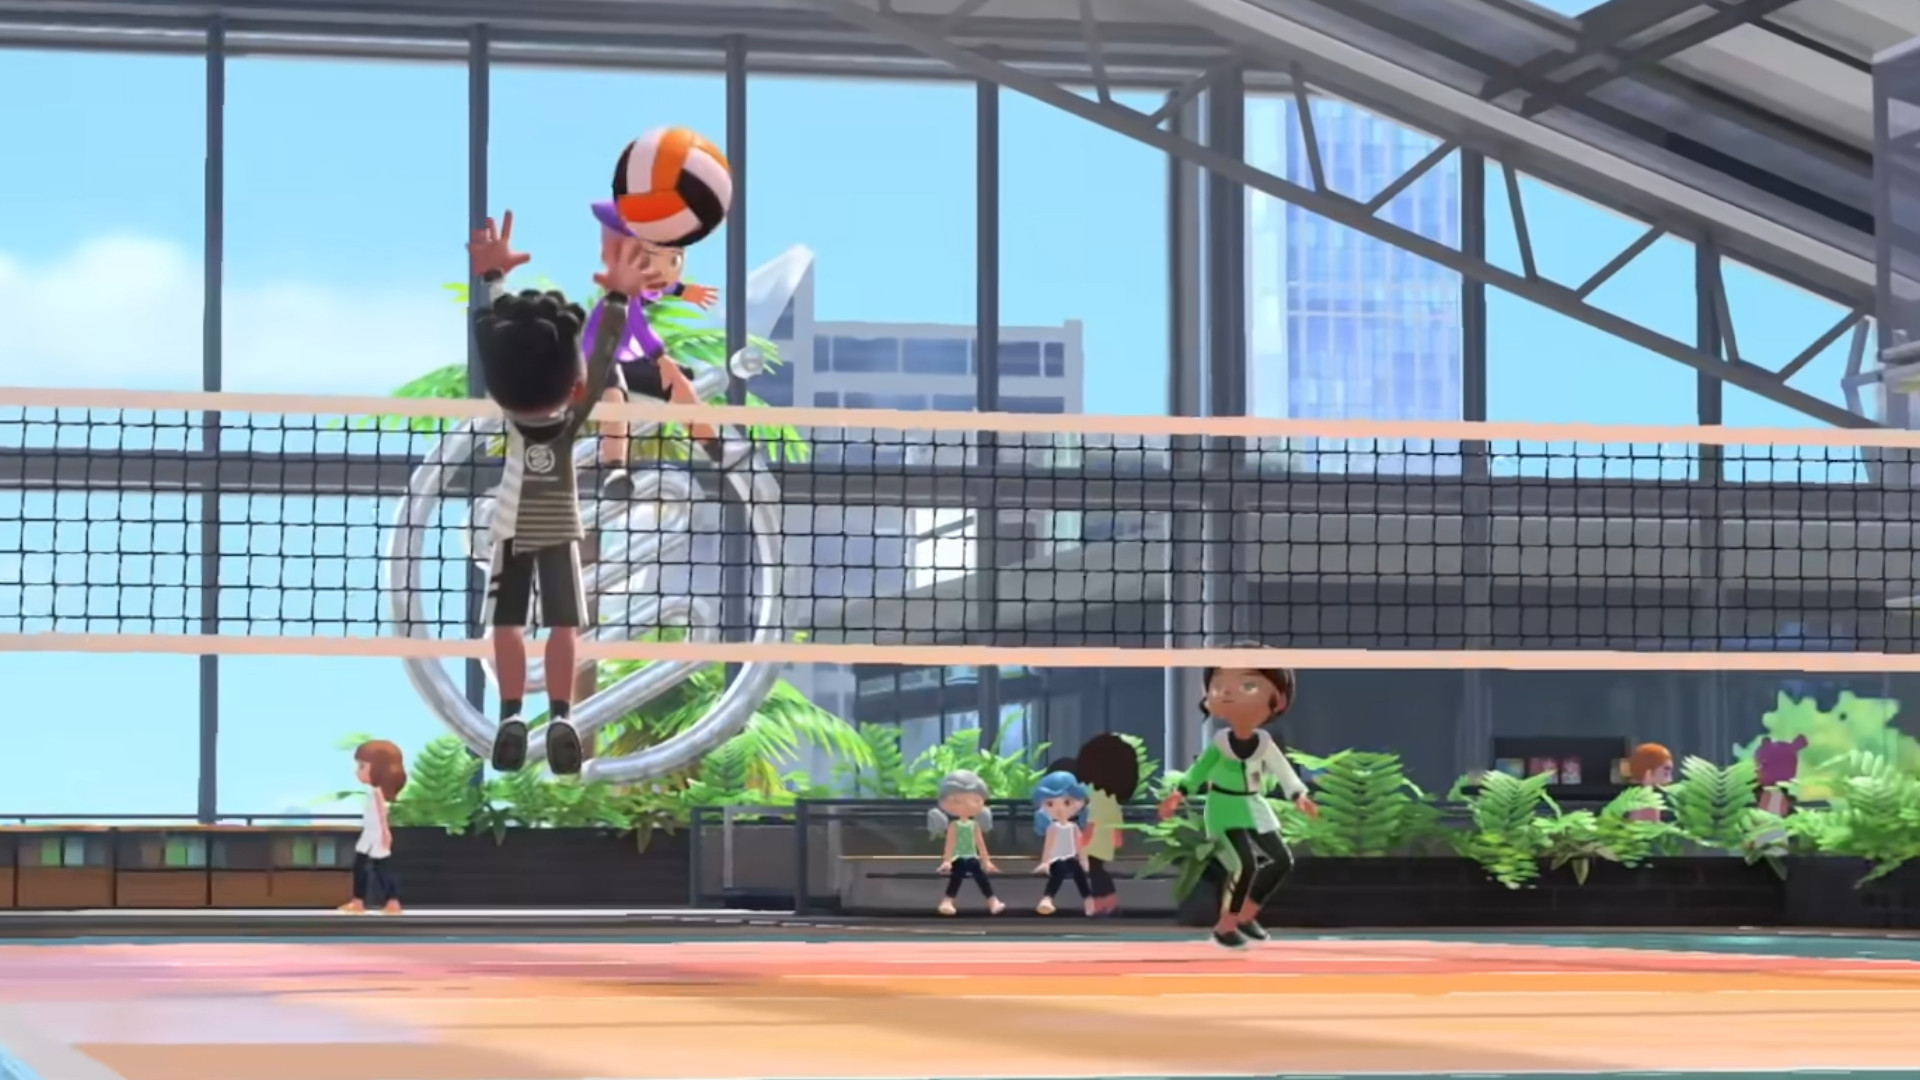 Nintendo Switch Sports is the Long-Awaited Sequel to One of the